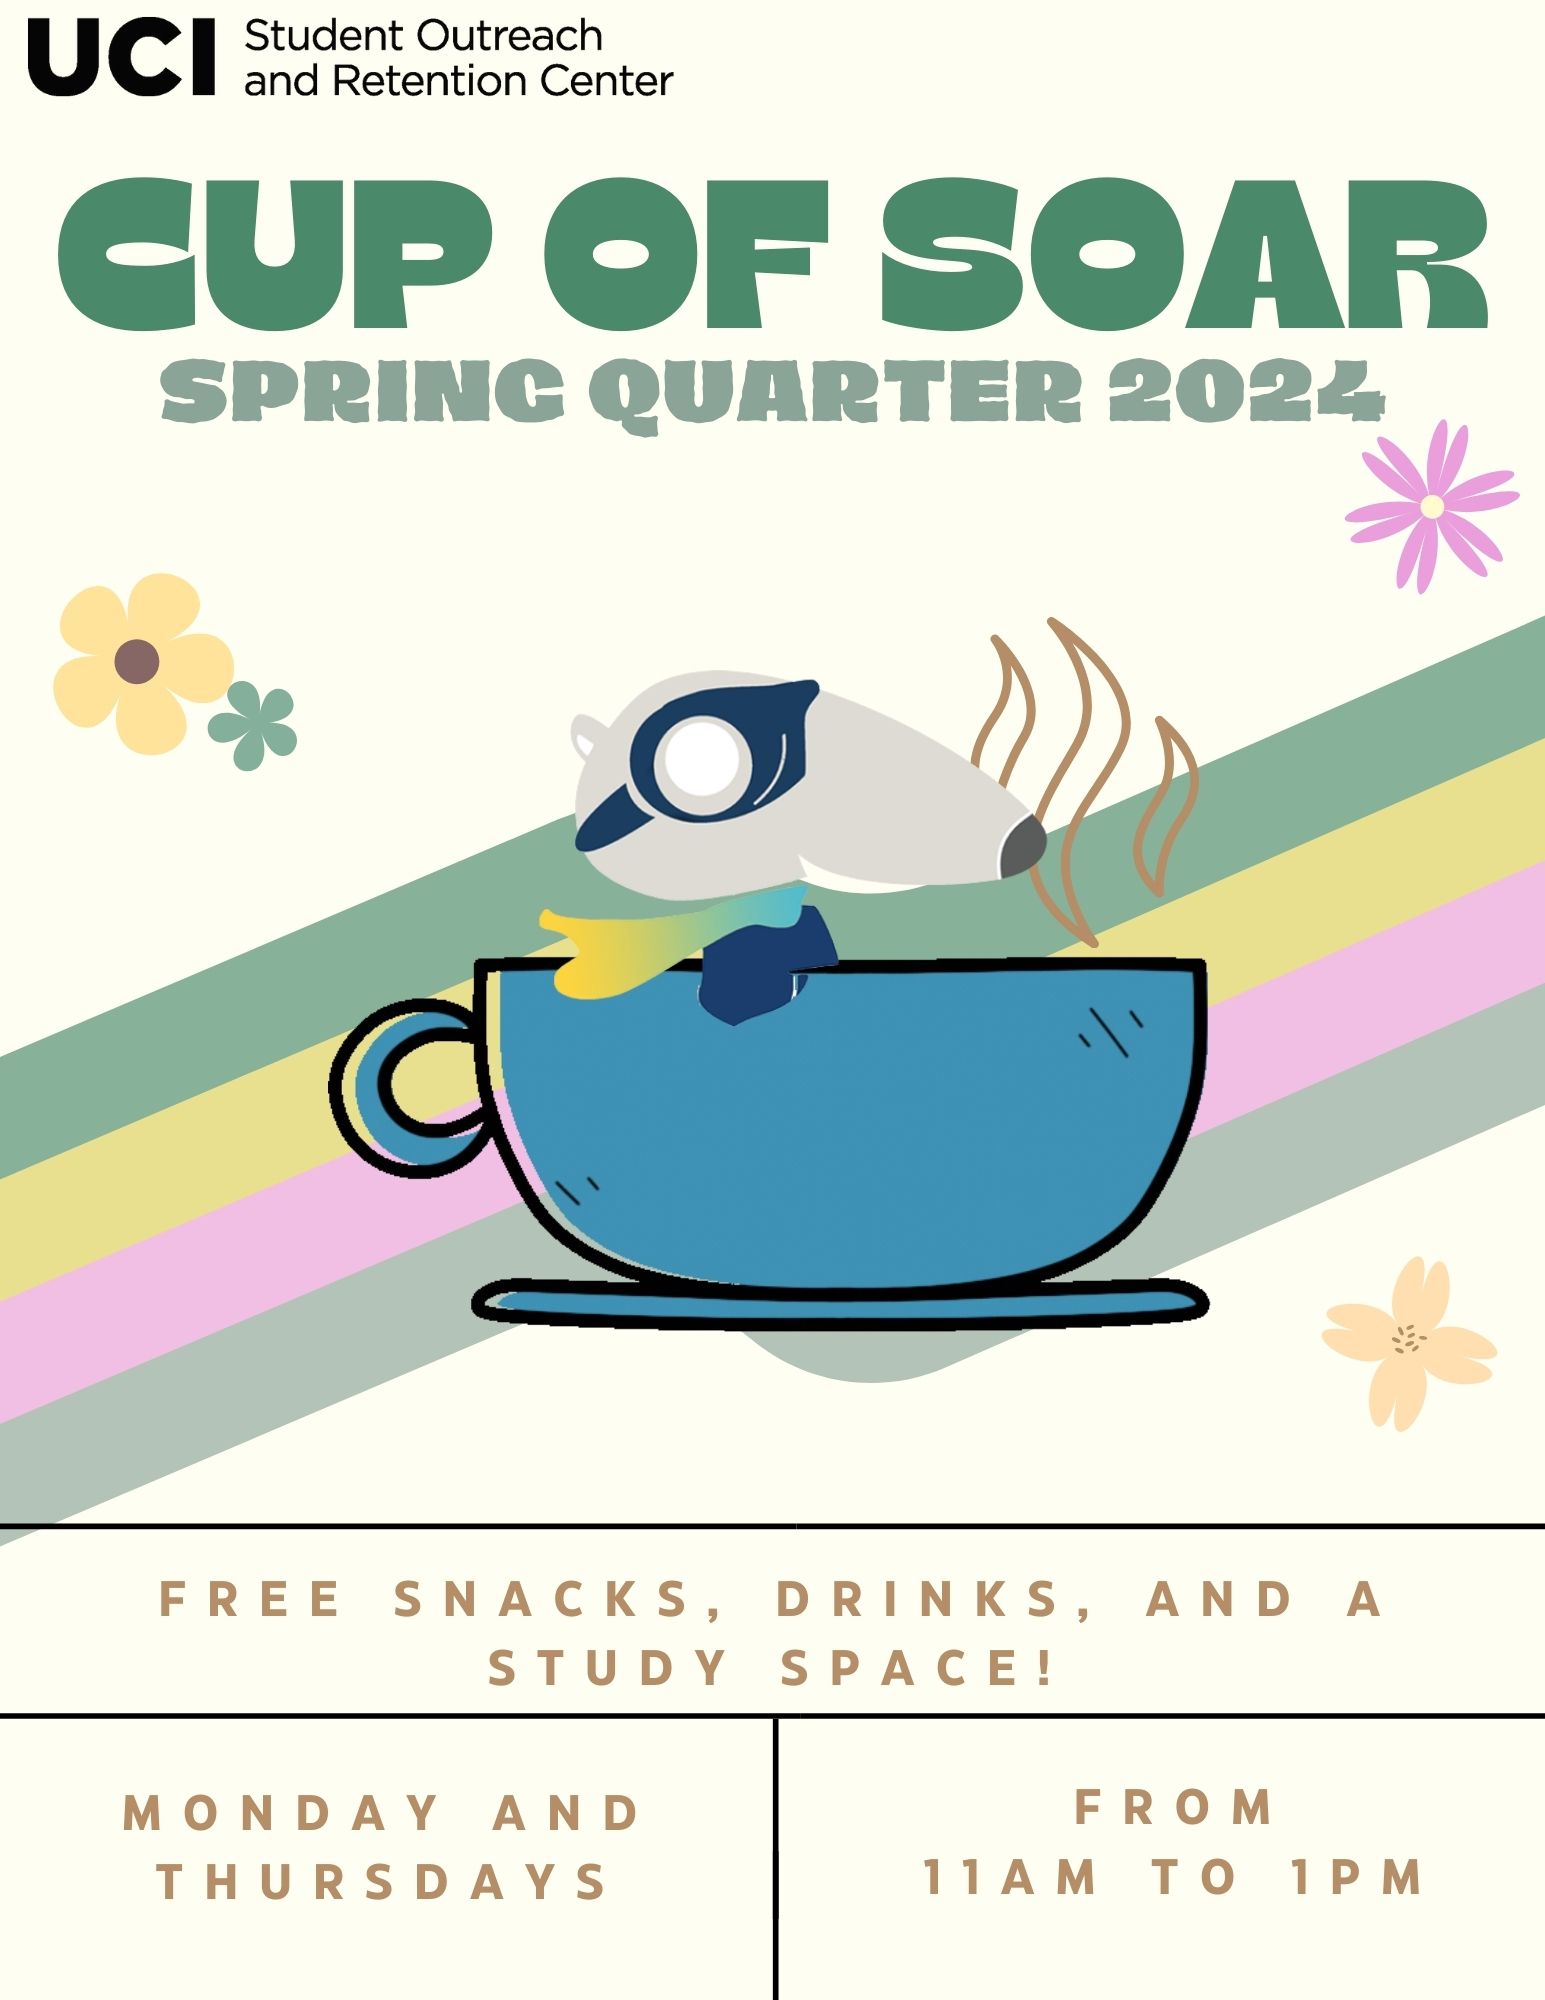 Flyer with information about Cup of SOAR